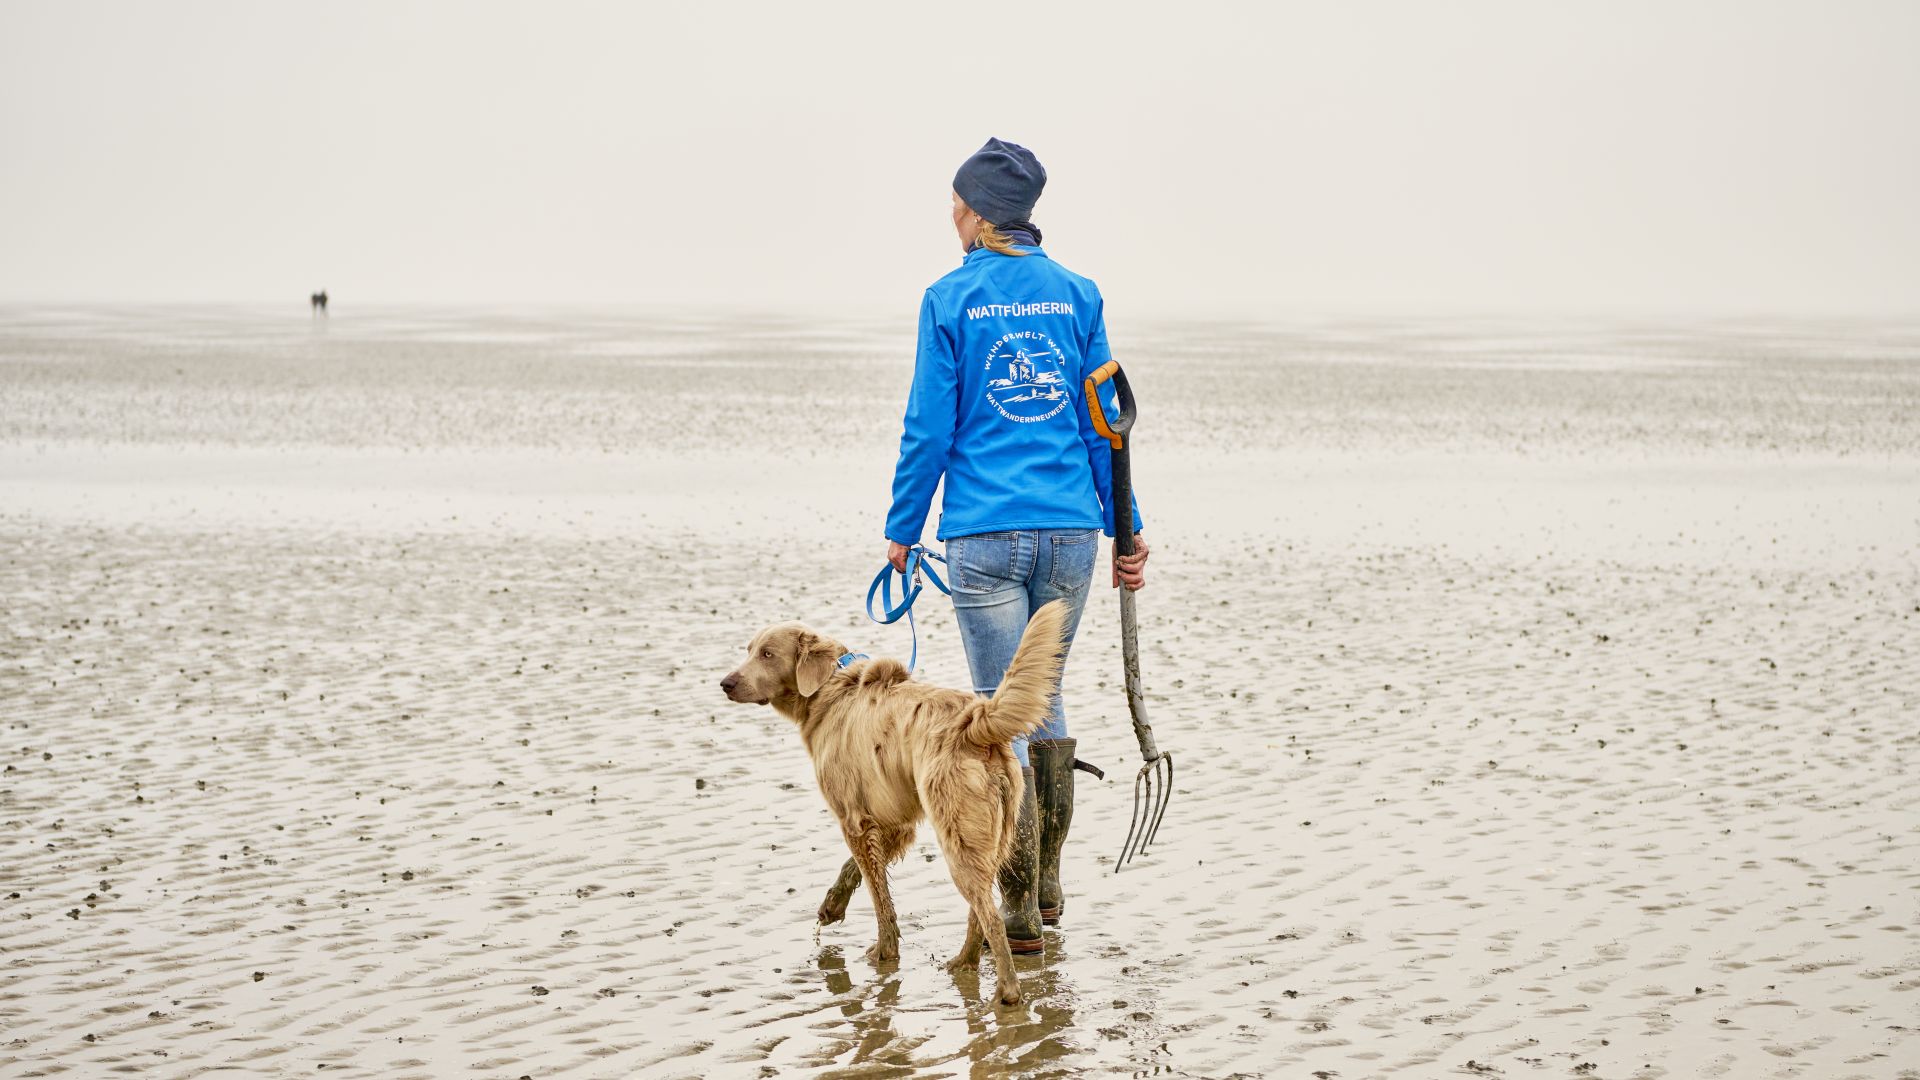 Otterndorf: The tidelands guide Julia Kobsch with her dog on the tidal flats